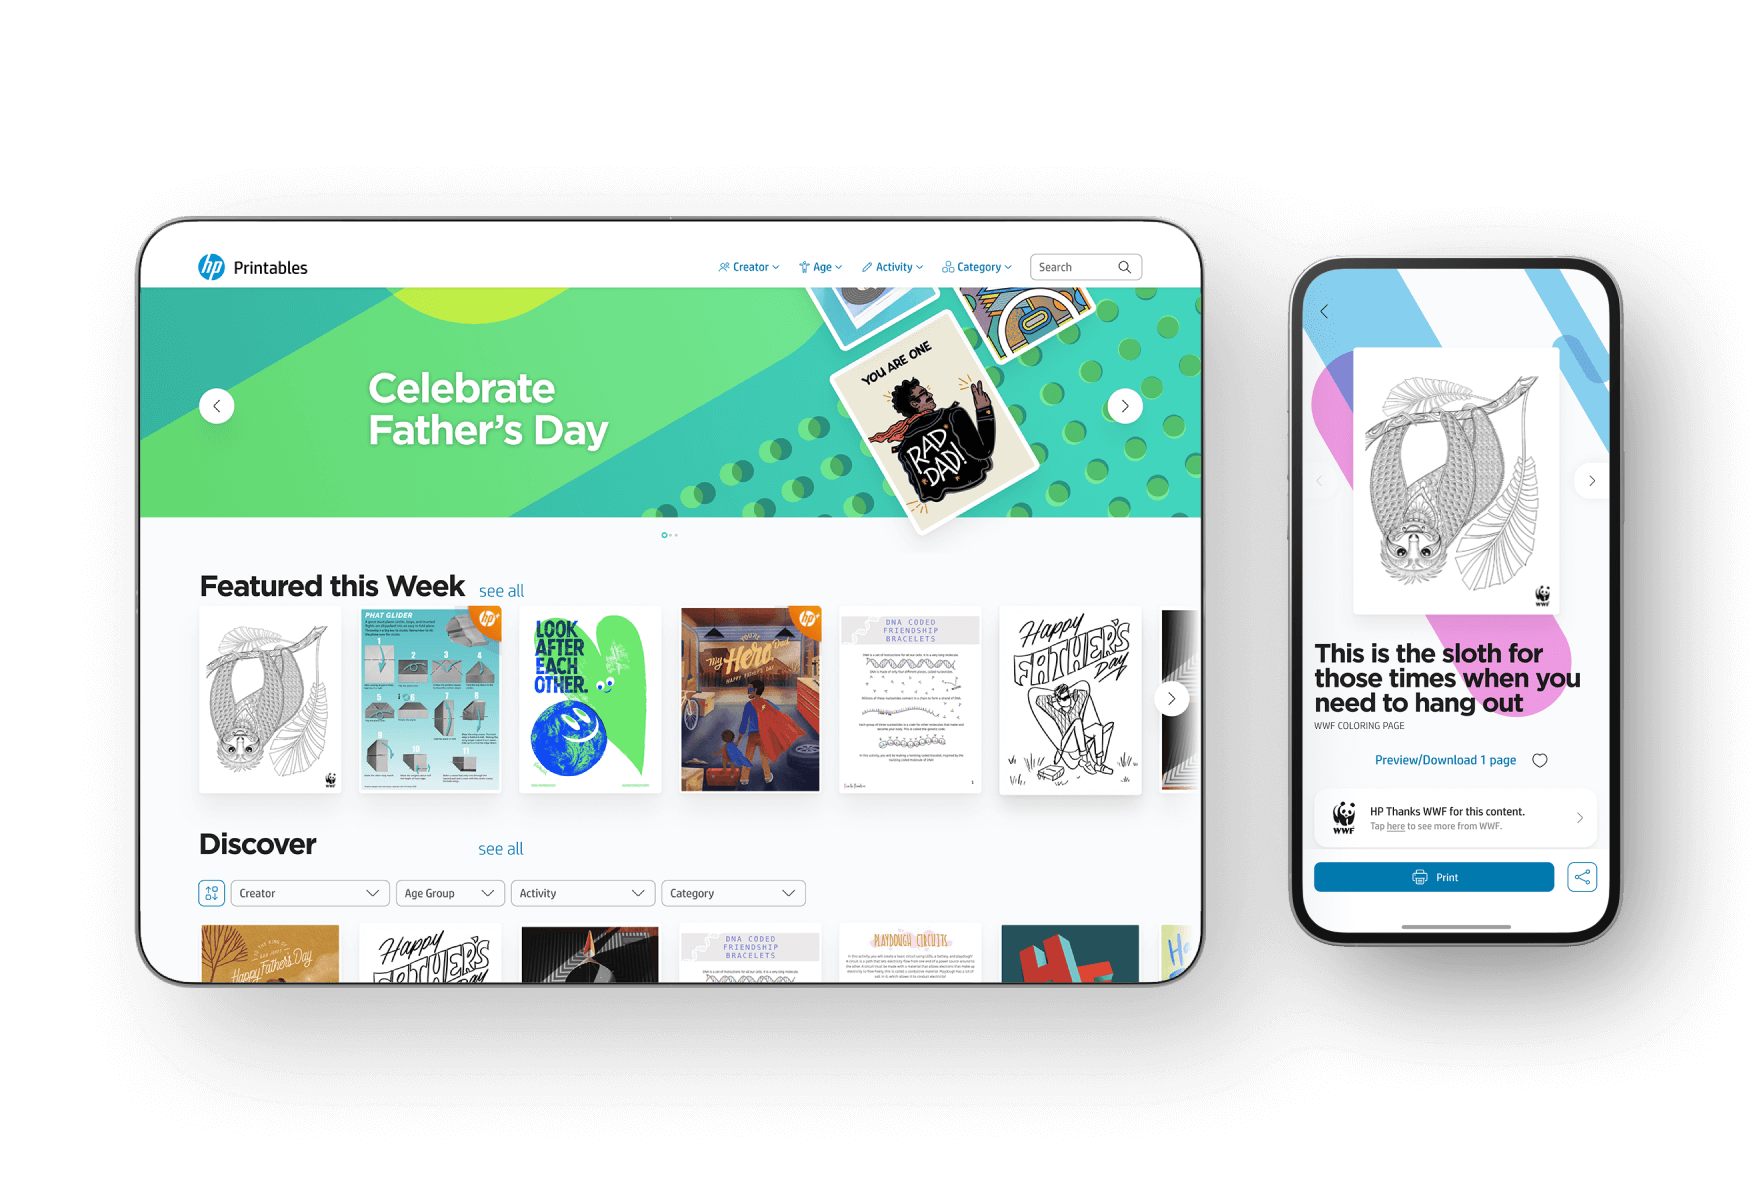 A tablet and a phone display a website's content themed around Father's Day, featuring printable designs including banners, cards, and other creative printables from the HP Printables app.